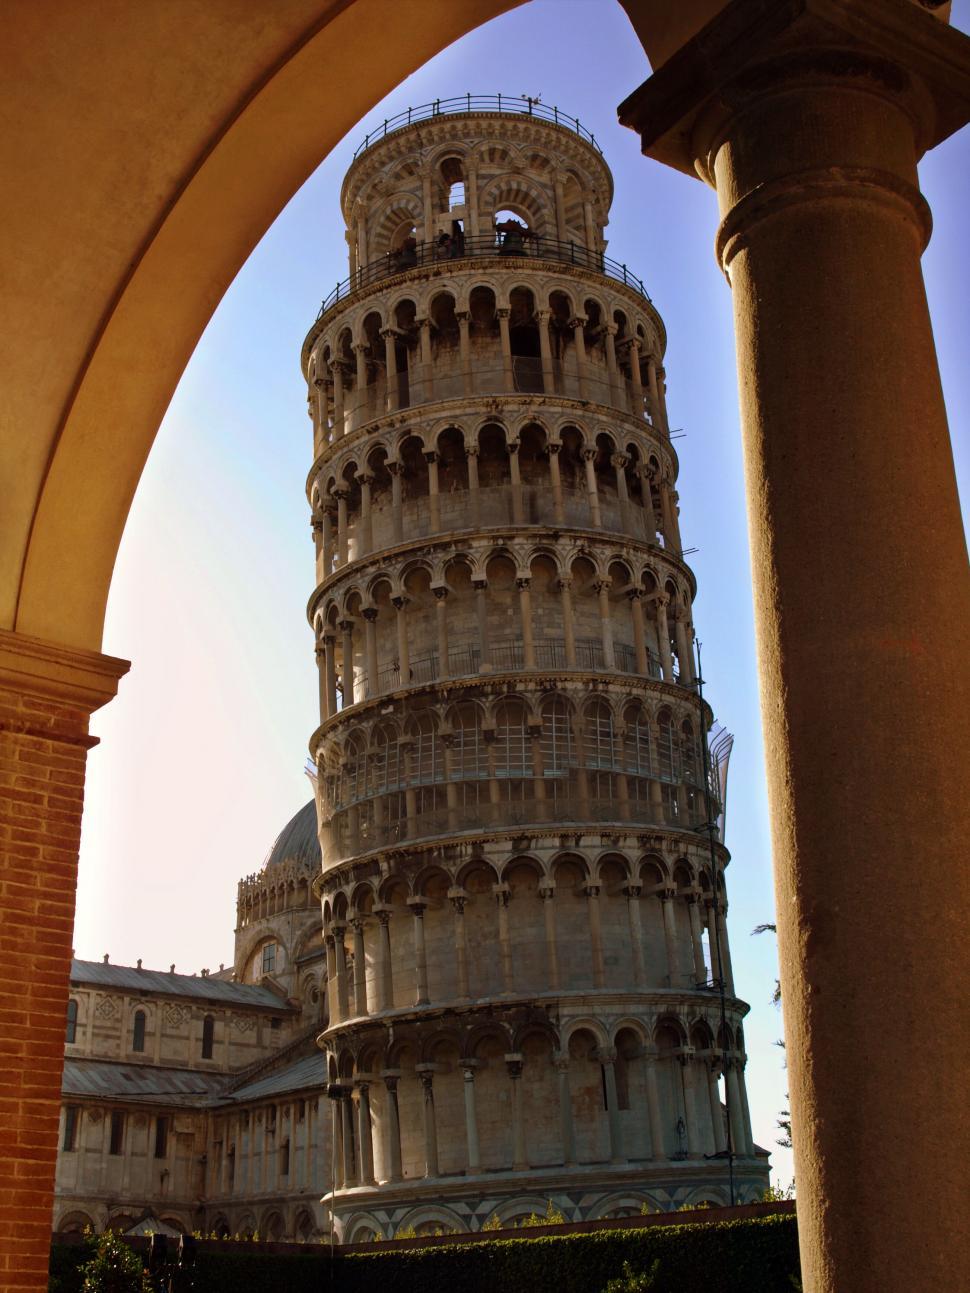 Free Image of Leaning Tower of Pisa viewed through an arch 